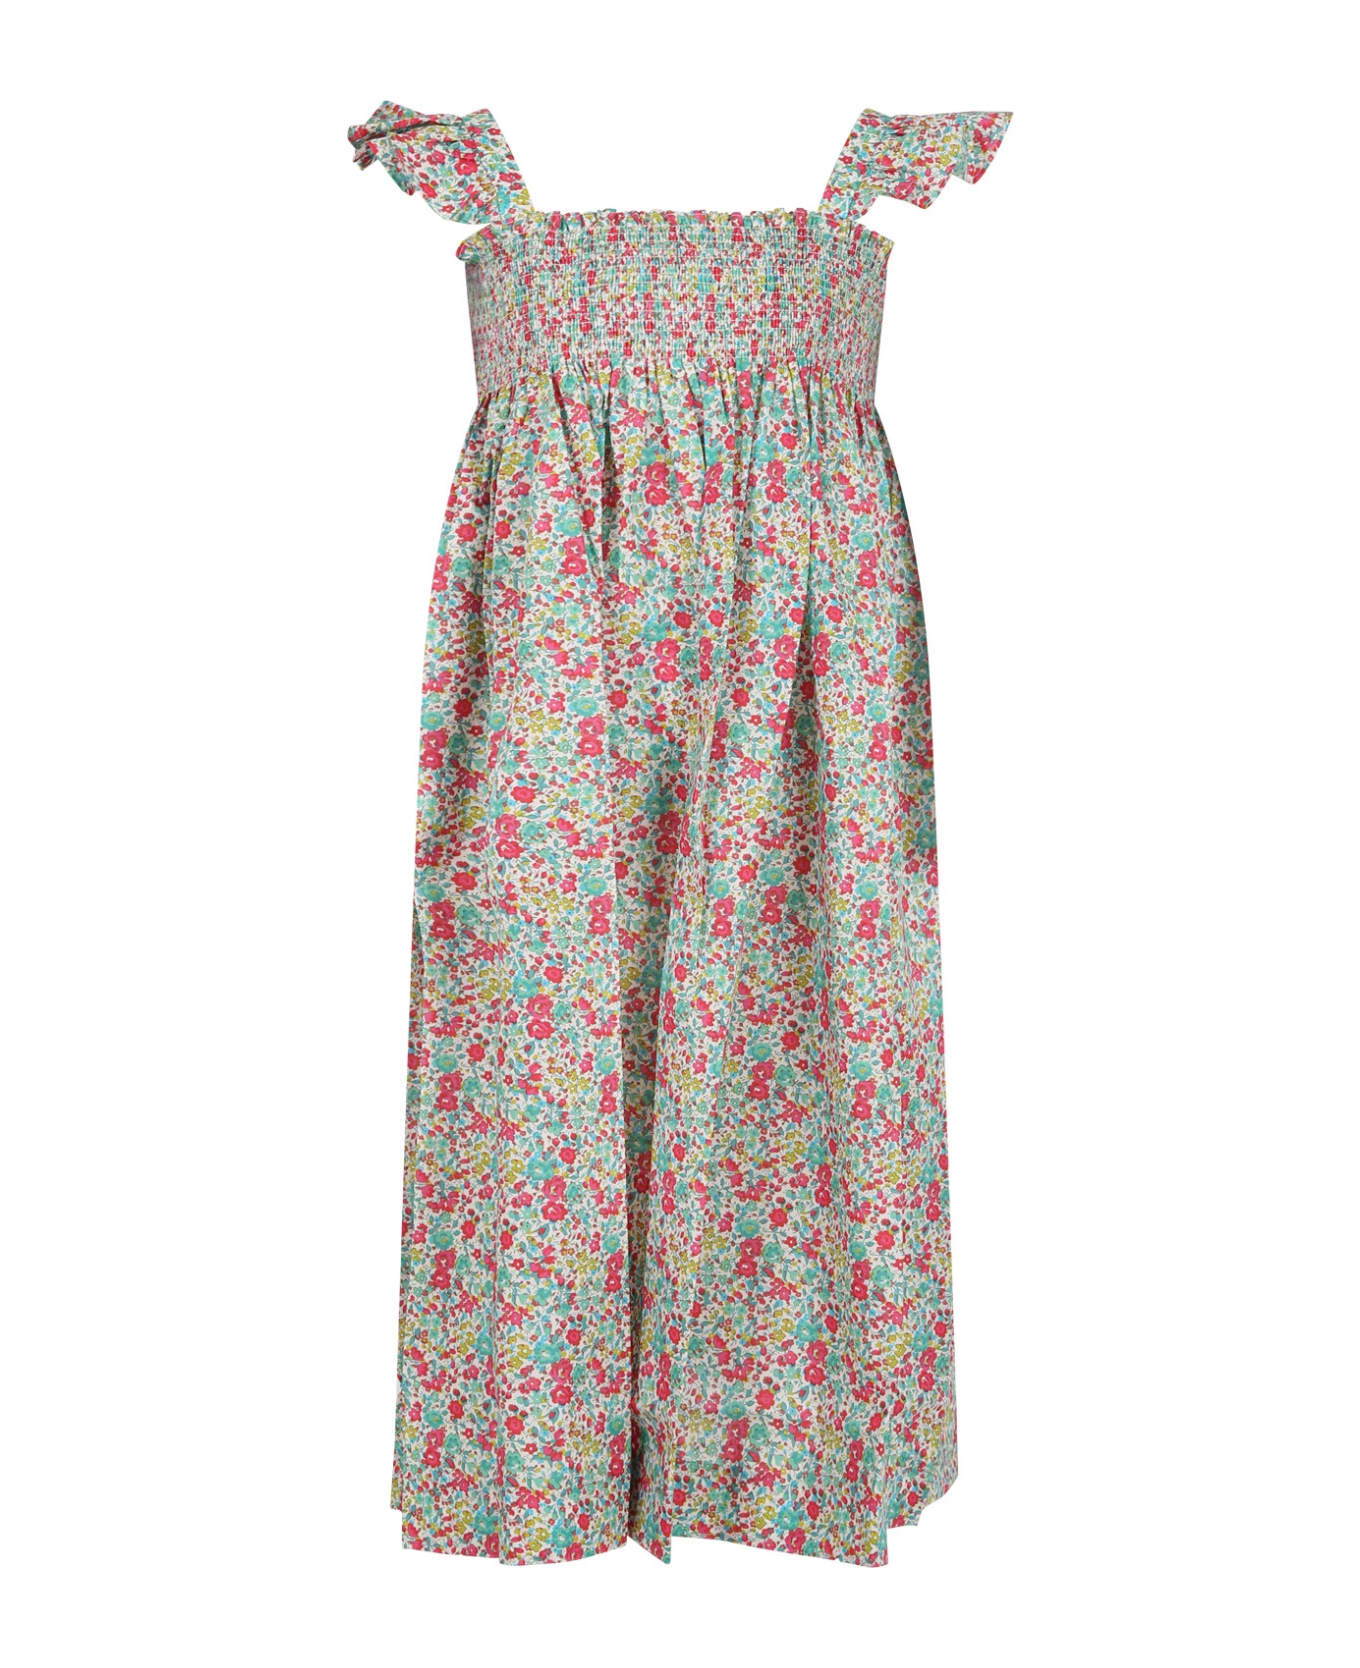 Bonpoint Multicolor Dress For Girl With Liberty Print - Multicolor